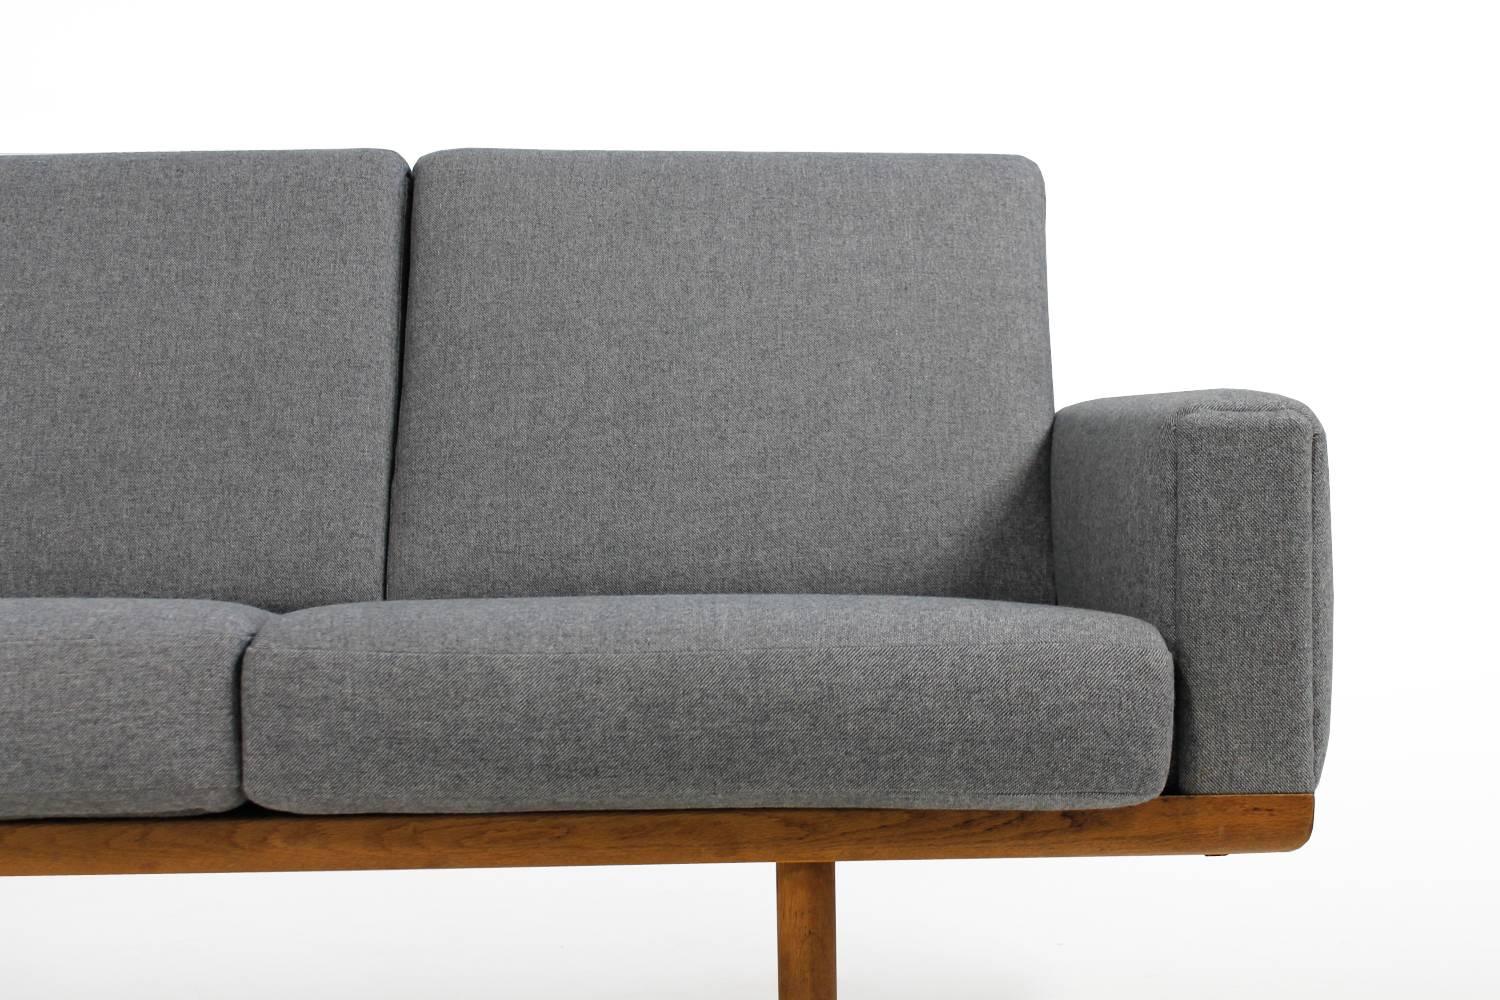 Hans Wegner GE 236 Sofa for Getama, Made in Denmark.
Very good condition, free standing, reupholstered and covered with new grey woven fabric. Fantastic oak wood and matching fabric.